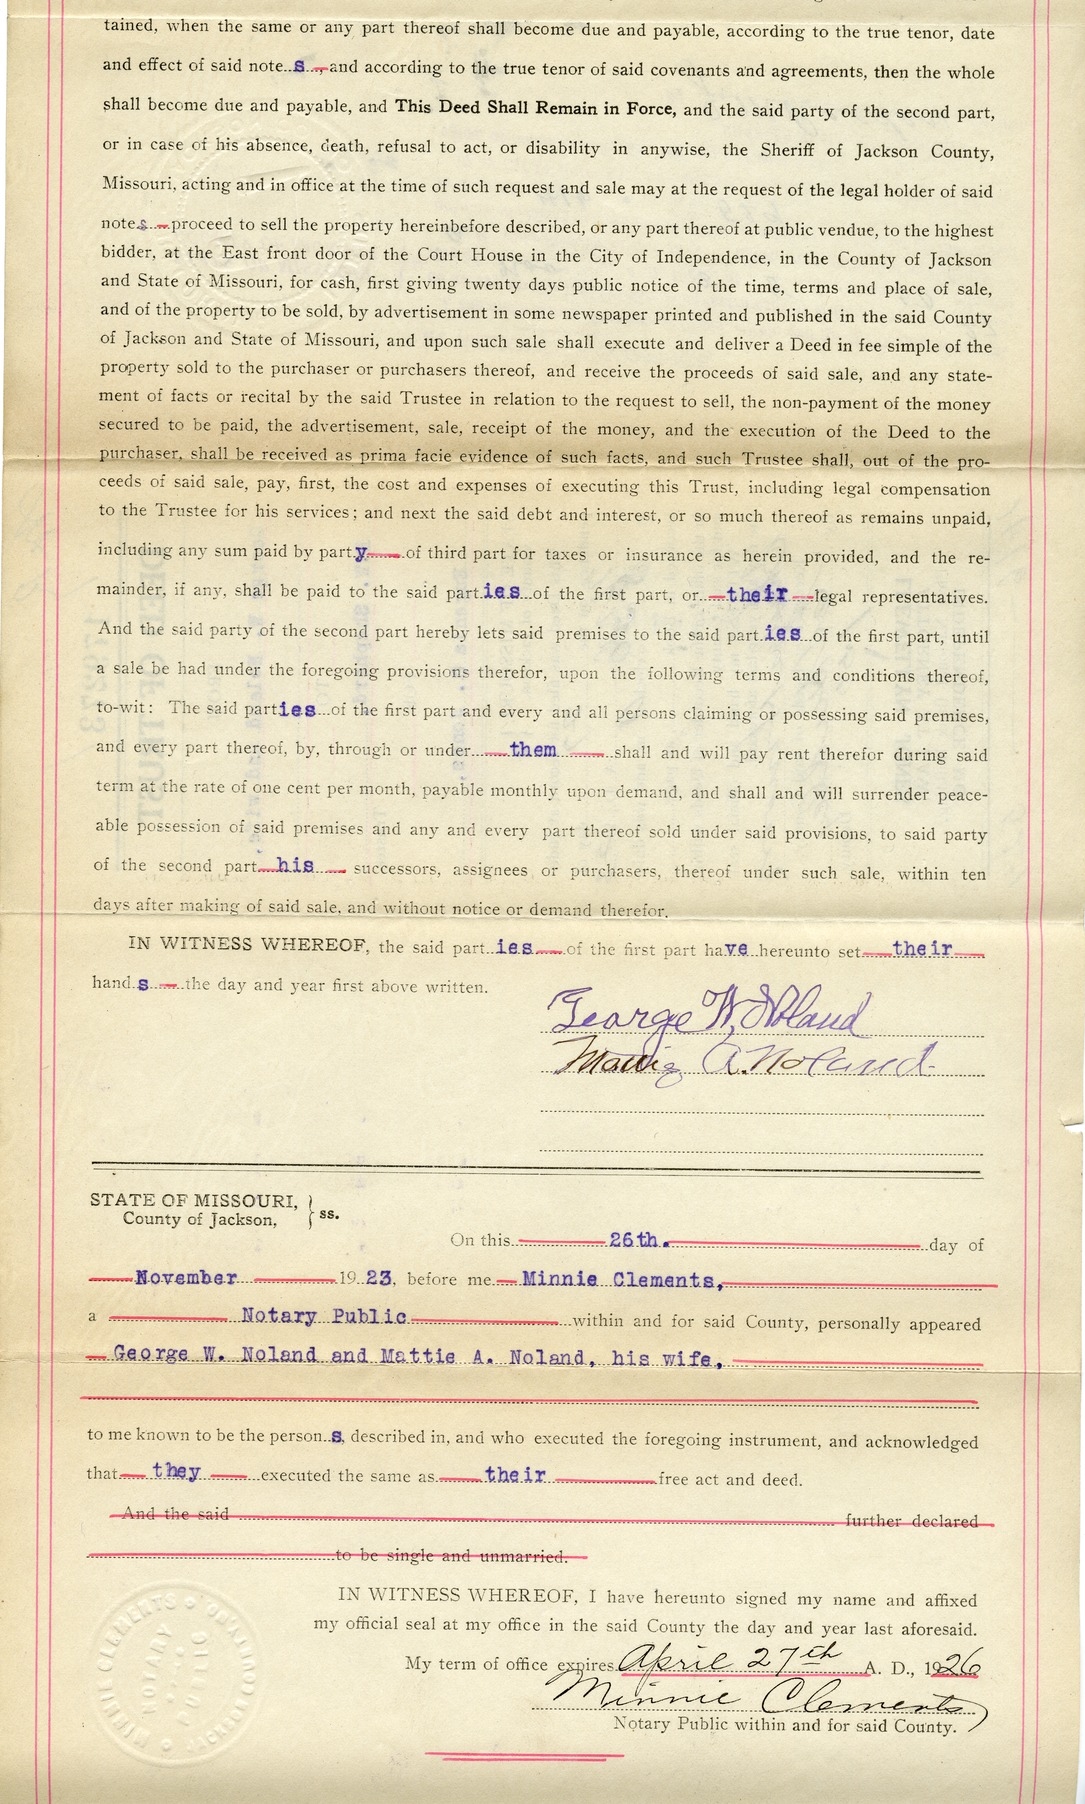 Deed of Trust from George W. Noland and Mattie A. Noland to E. W. Shepherd for Eugenia O. Jones